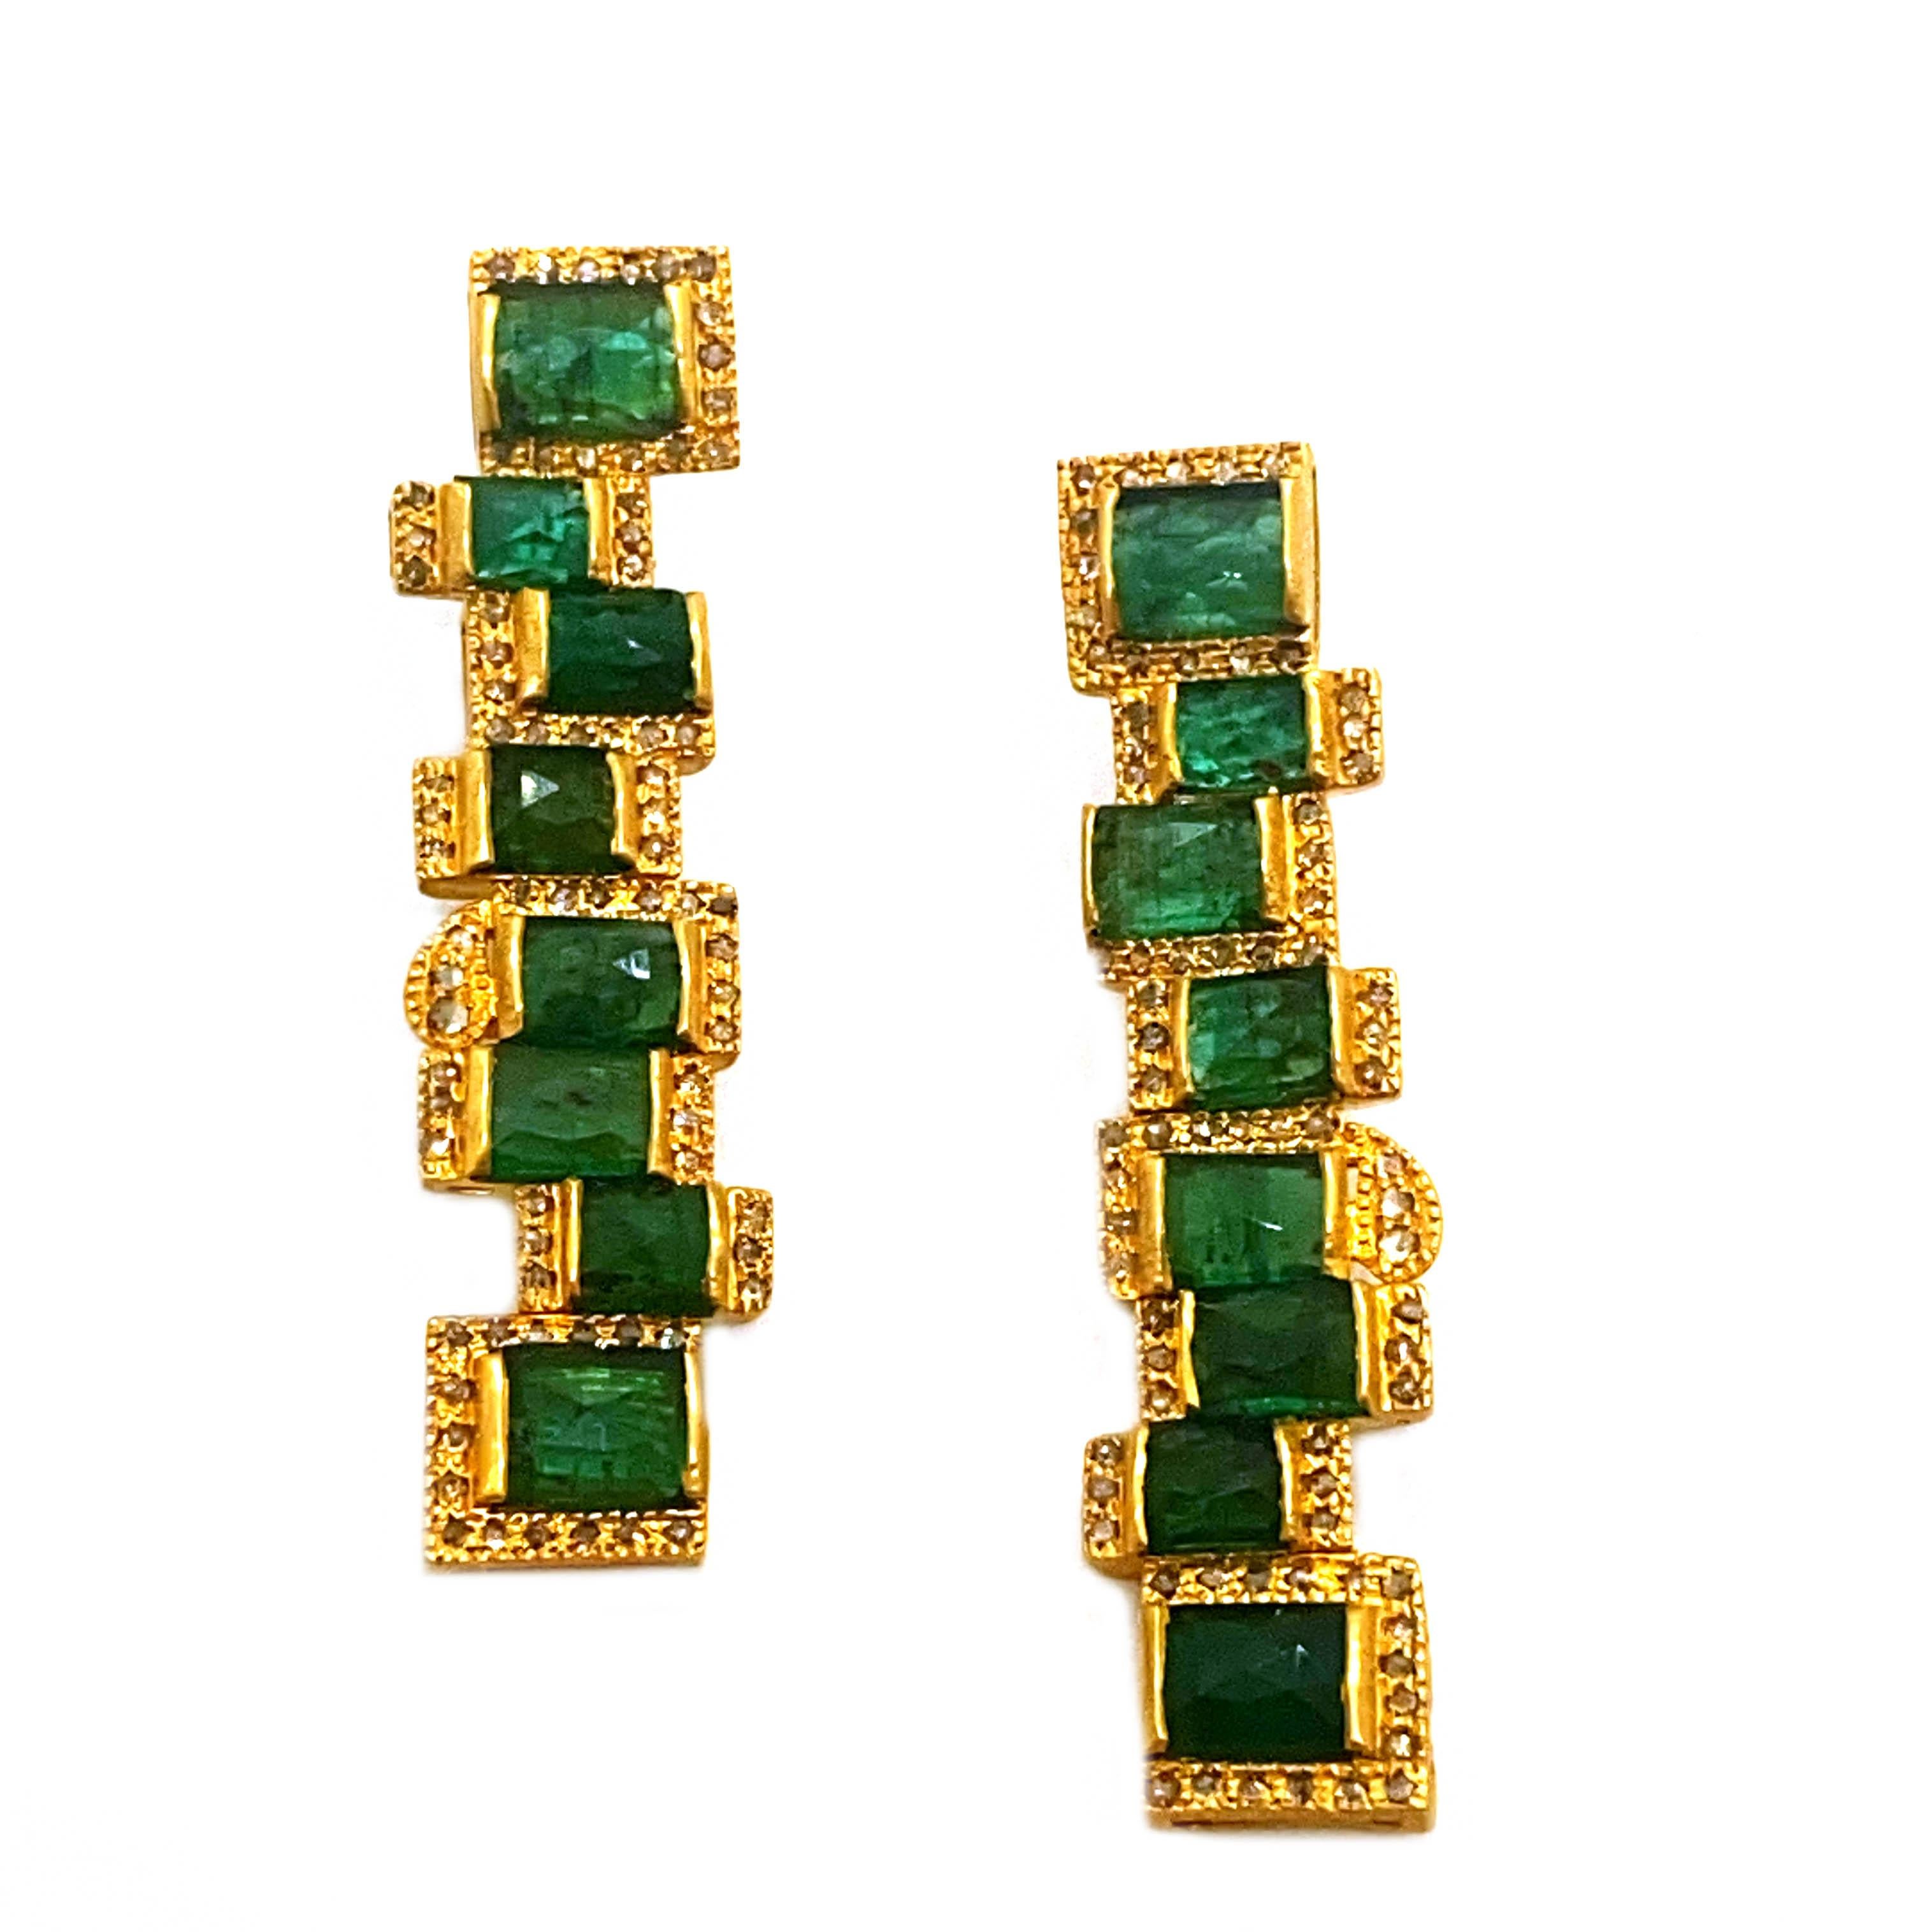 Mosaic Art Deco Style Emerald 20 Karat Yellow Gold Coomi Earrings In New Condition For Sale In Secaucus, NJ